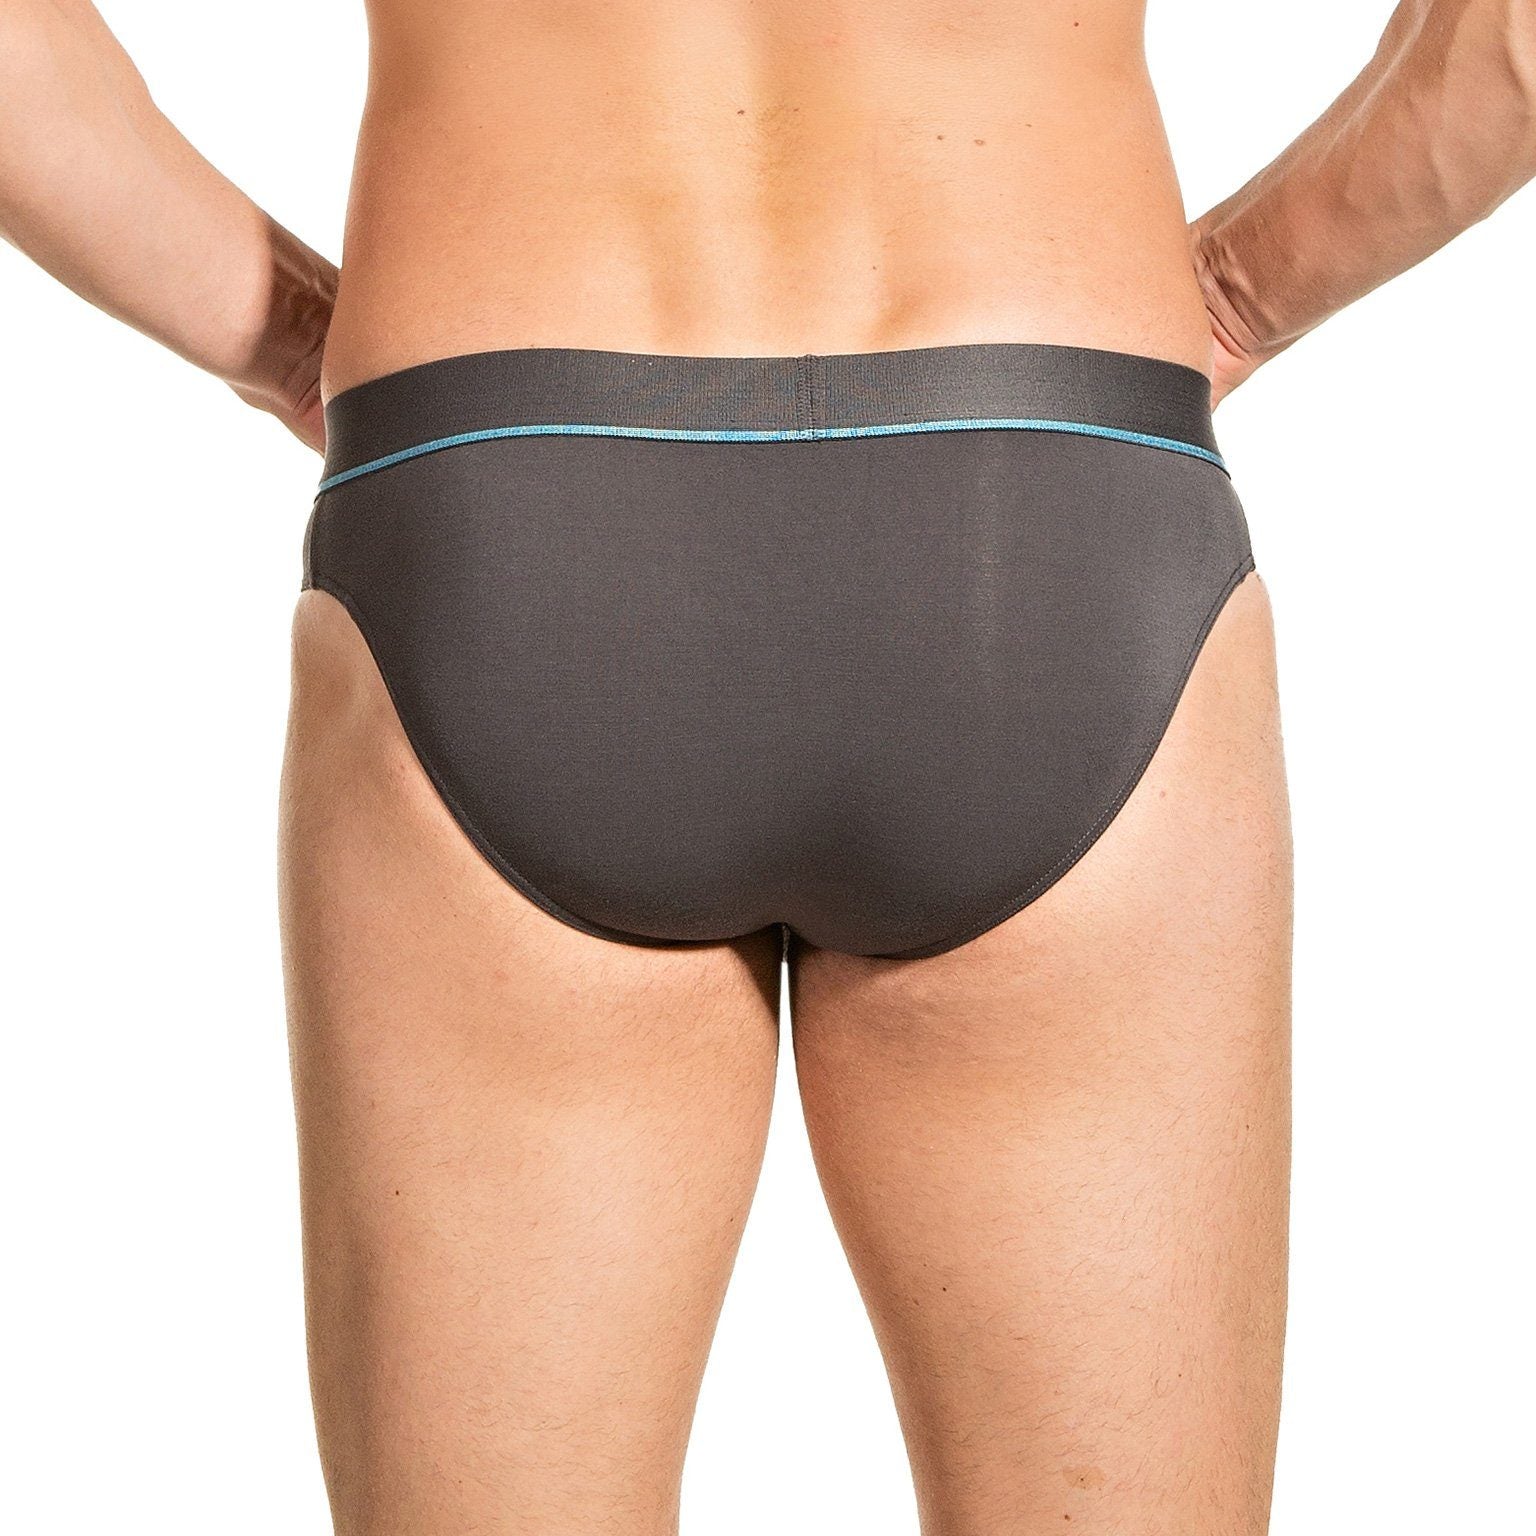 OBVIOUSLY PrimeMan - Hipster Brief, Black, Small 